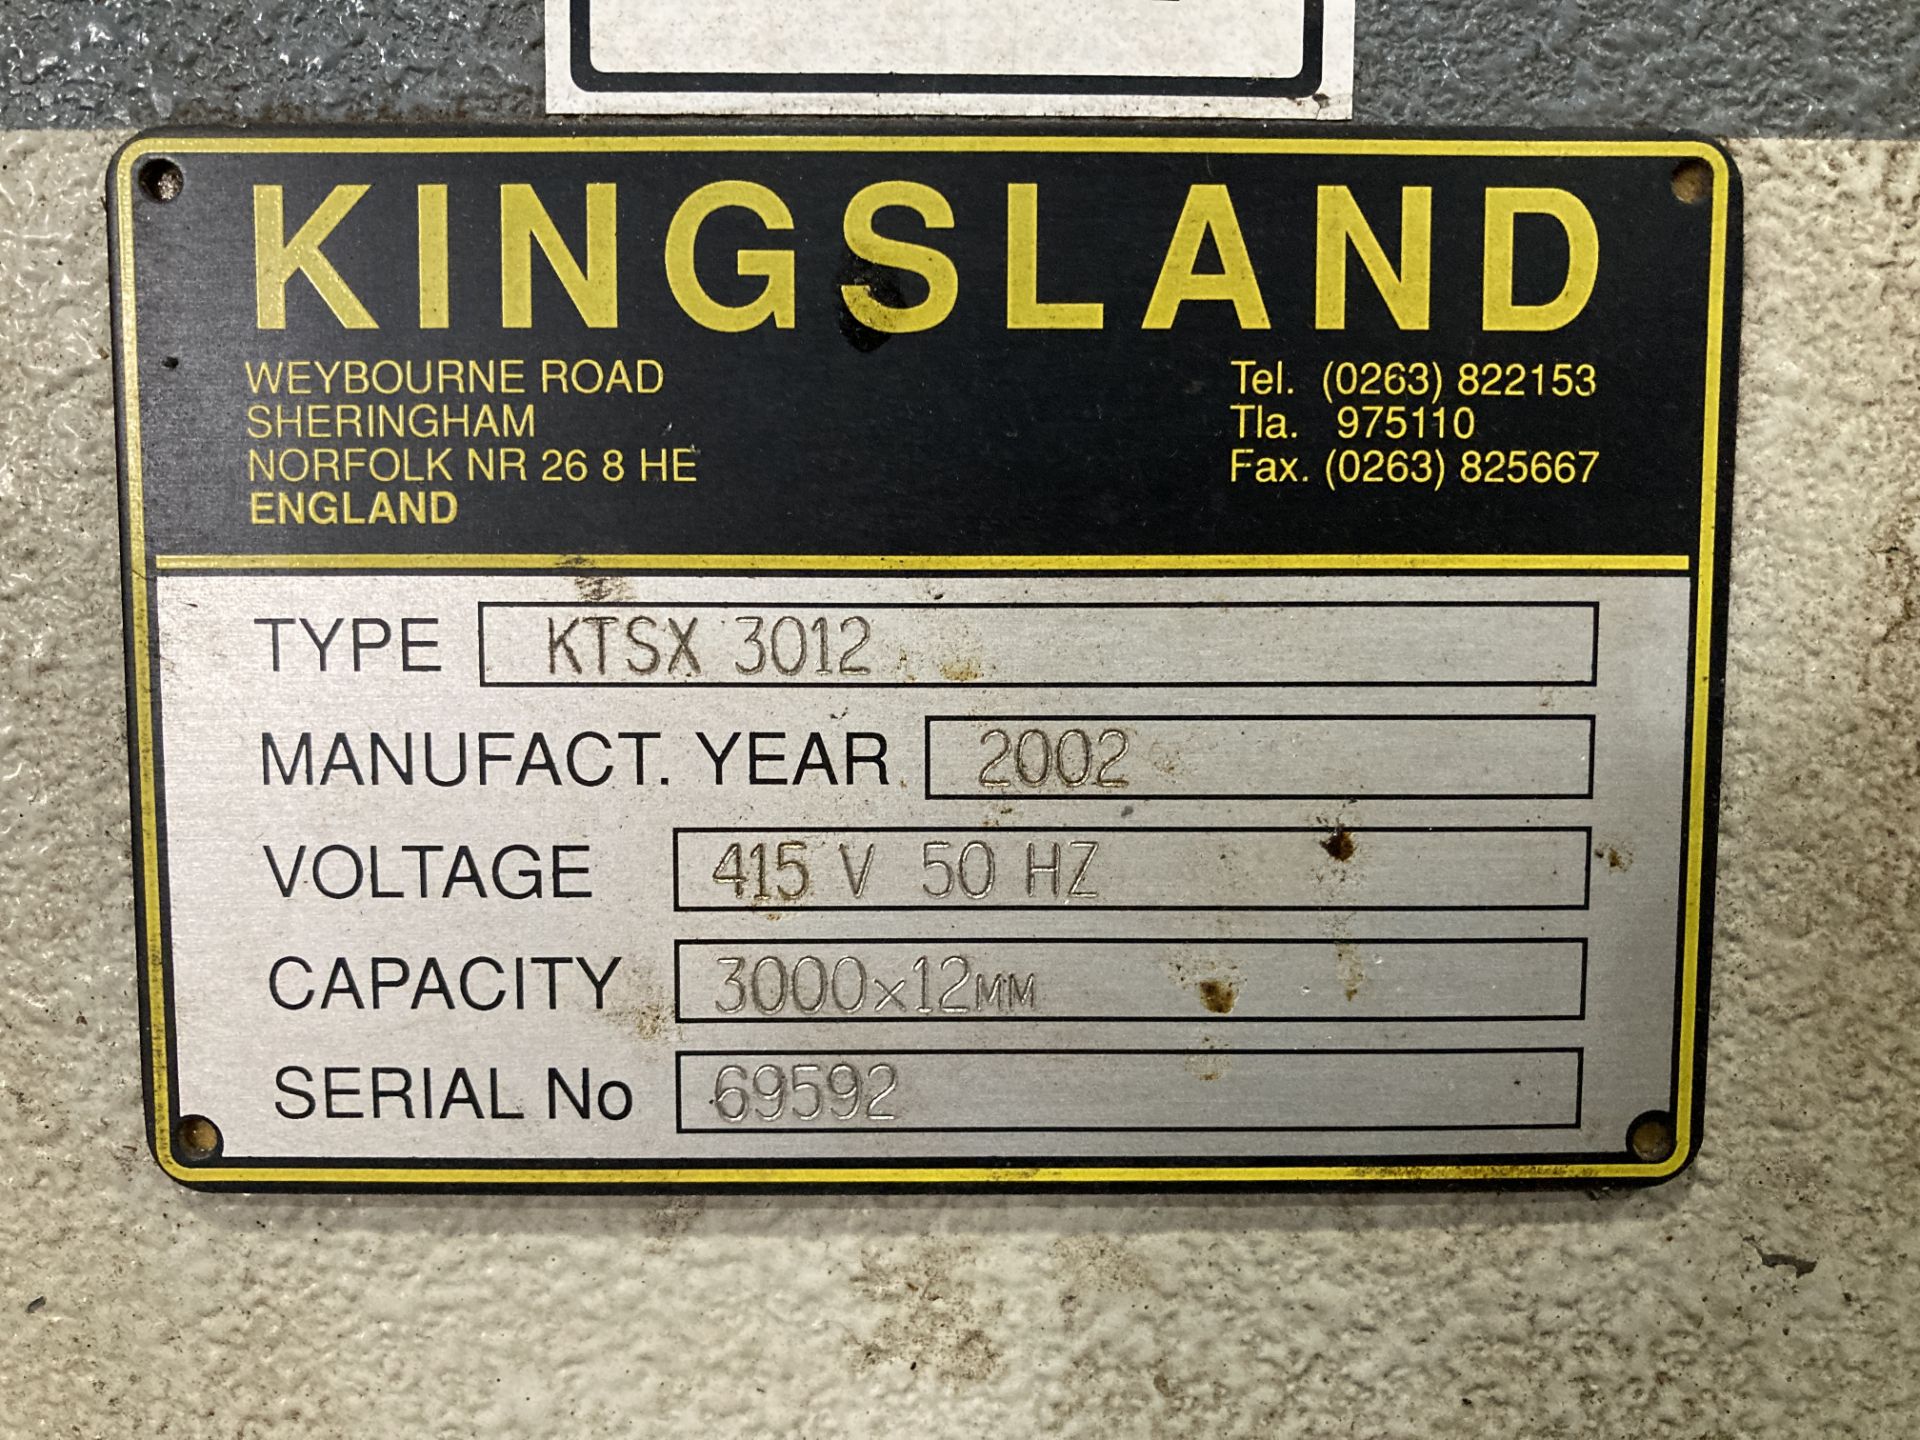 Kingsland KTXS3012 hydraulic guillotine 3m x 12mm capacity, year 2002, serial no. 69592 with SC7 - Image 5 of 9